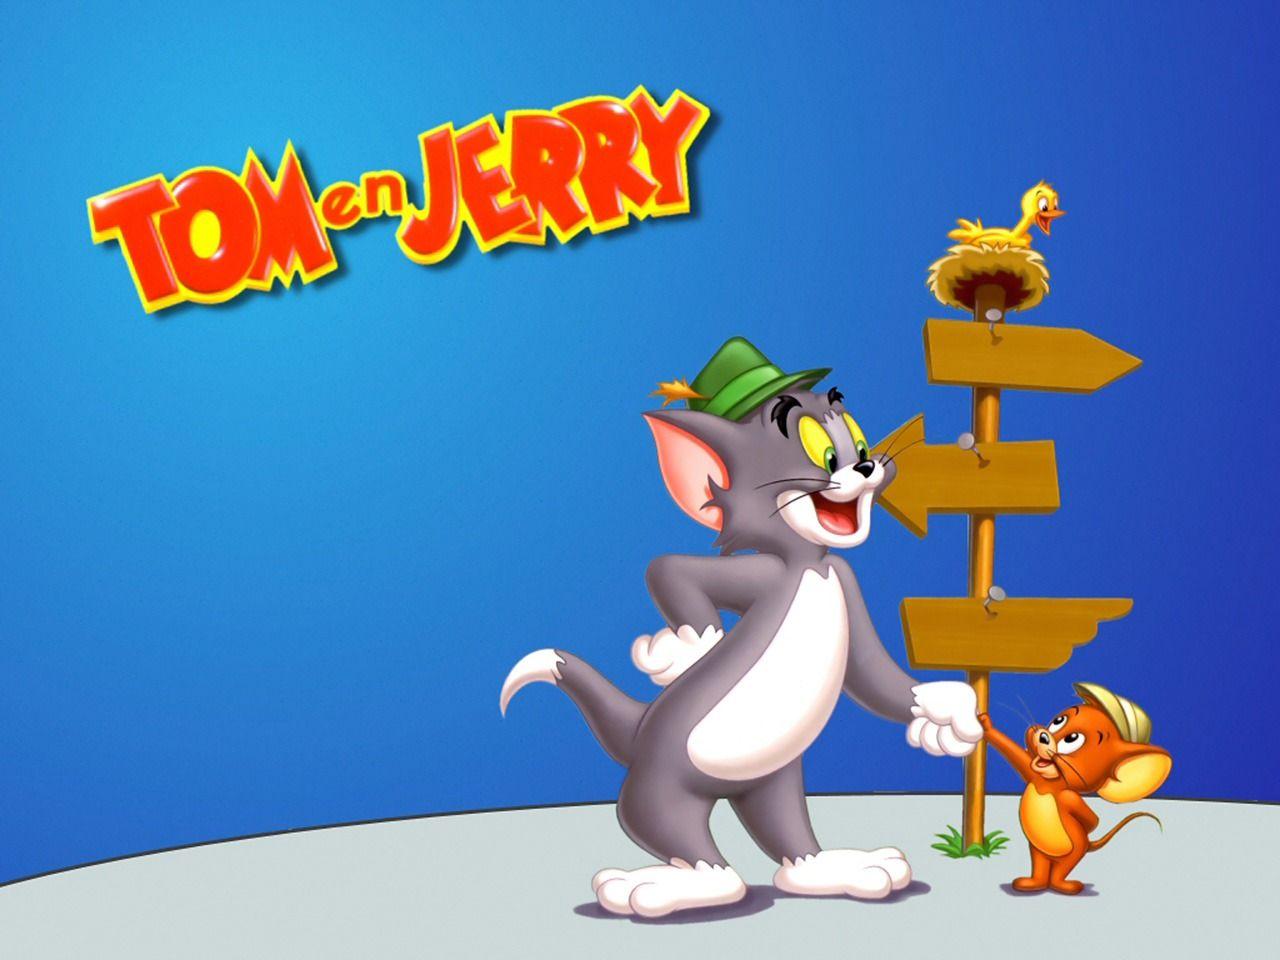 Tom and Jerry Wallpaper Cartoons Anime Animated Wallpaper in jpg